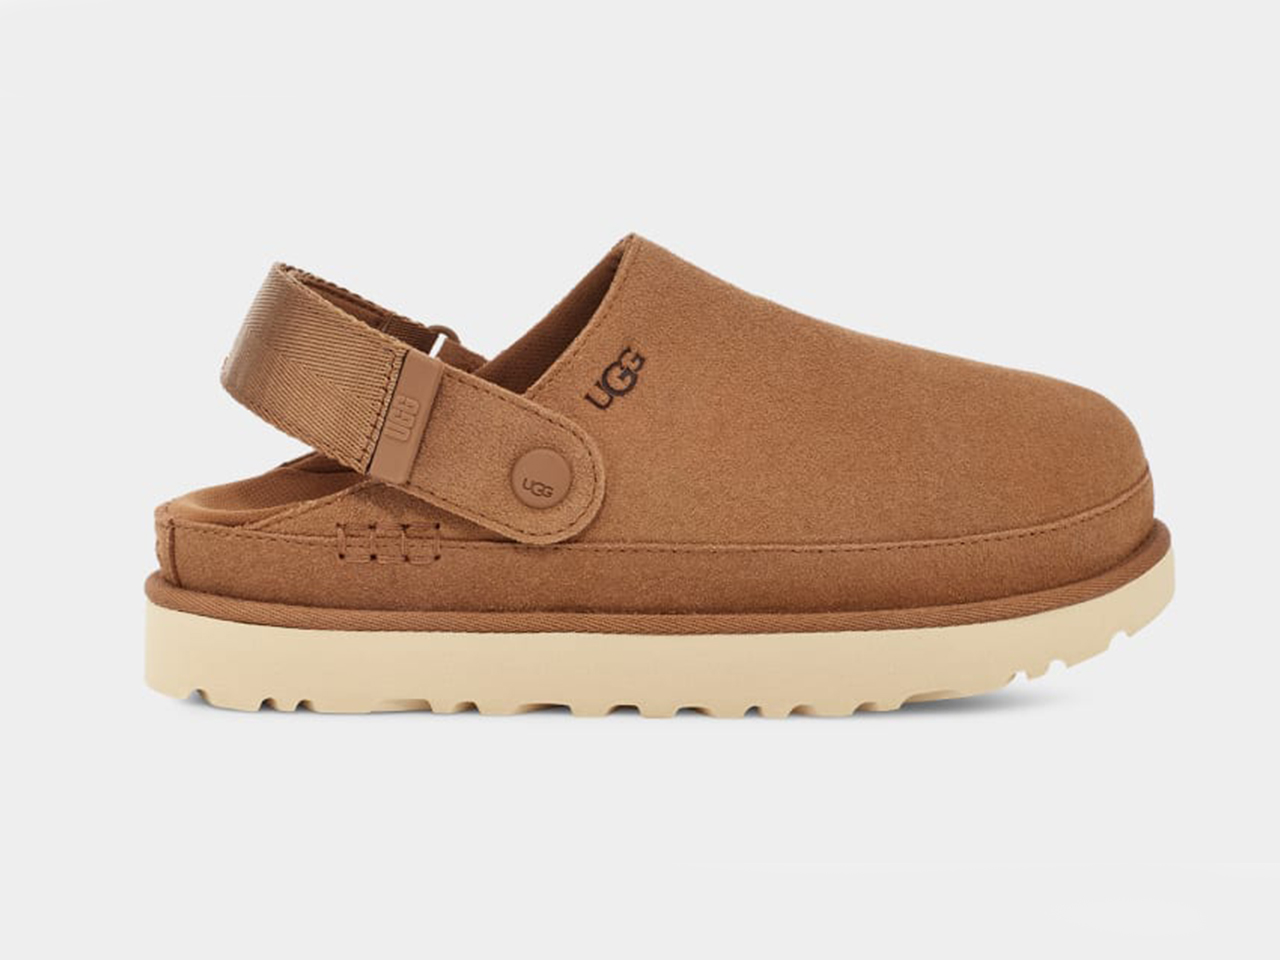 A side profile of a pair of suede tan slingback clogs from Ugg.